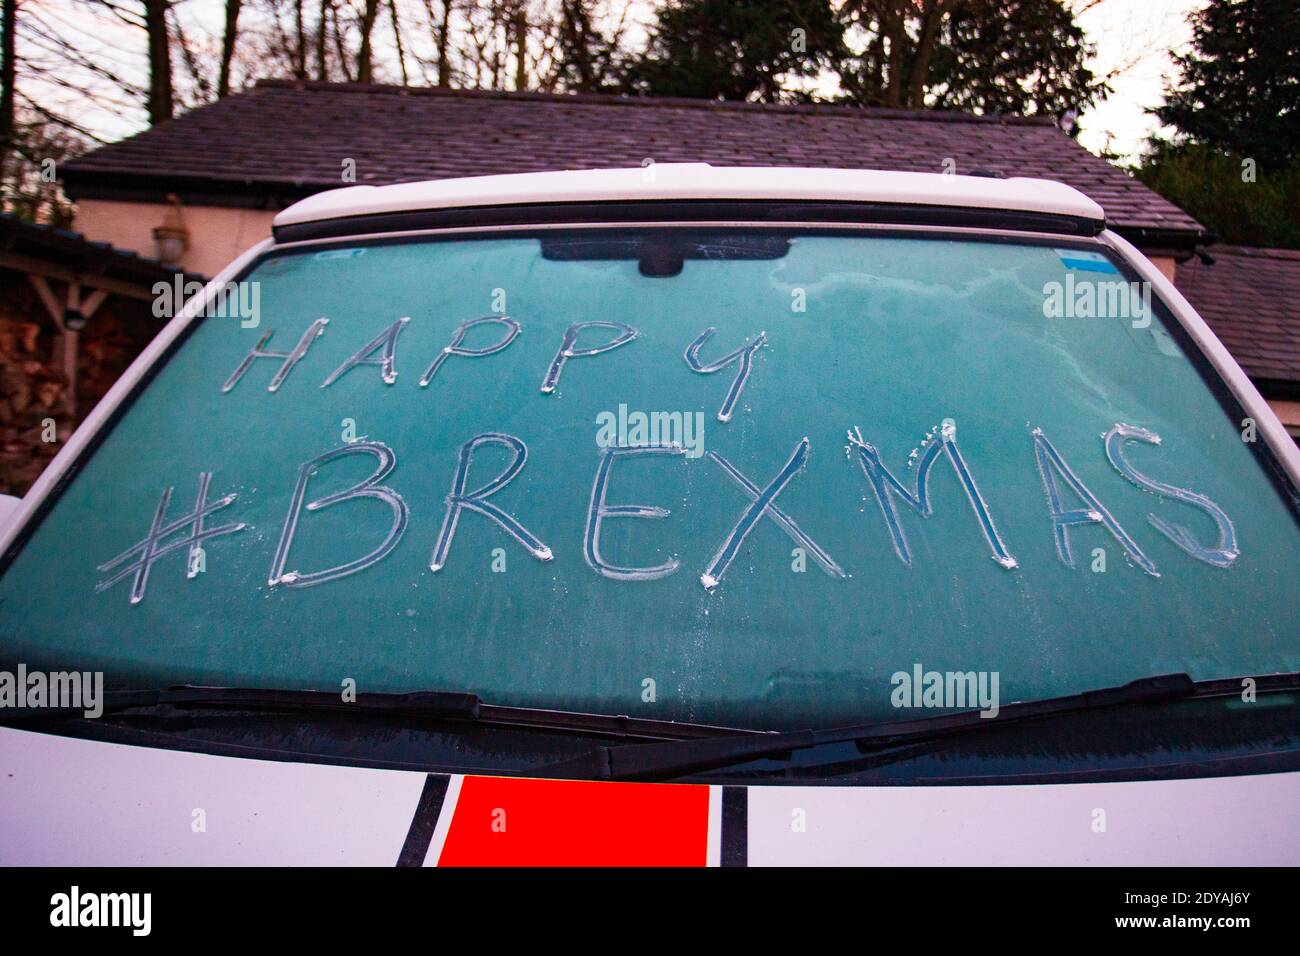 Halkyn, North Wales, UK 25th December 2020, A cold and frosty Christmas morning for many as an overnight frost has left many with either a sharp frost or even snow in the UK. Here in North Wales the temperature fell below zero to leave a morning frost allowing people to express their holiday notes in the windscreen ice as this driver did with Happy Brexmas © DGDImages/Alamy Live News Stock Photo